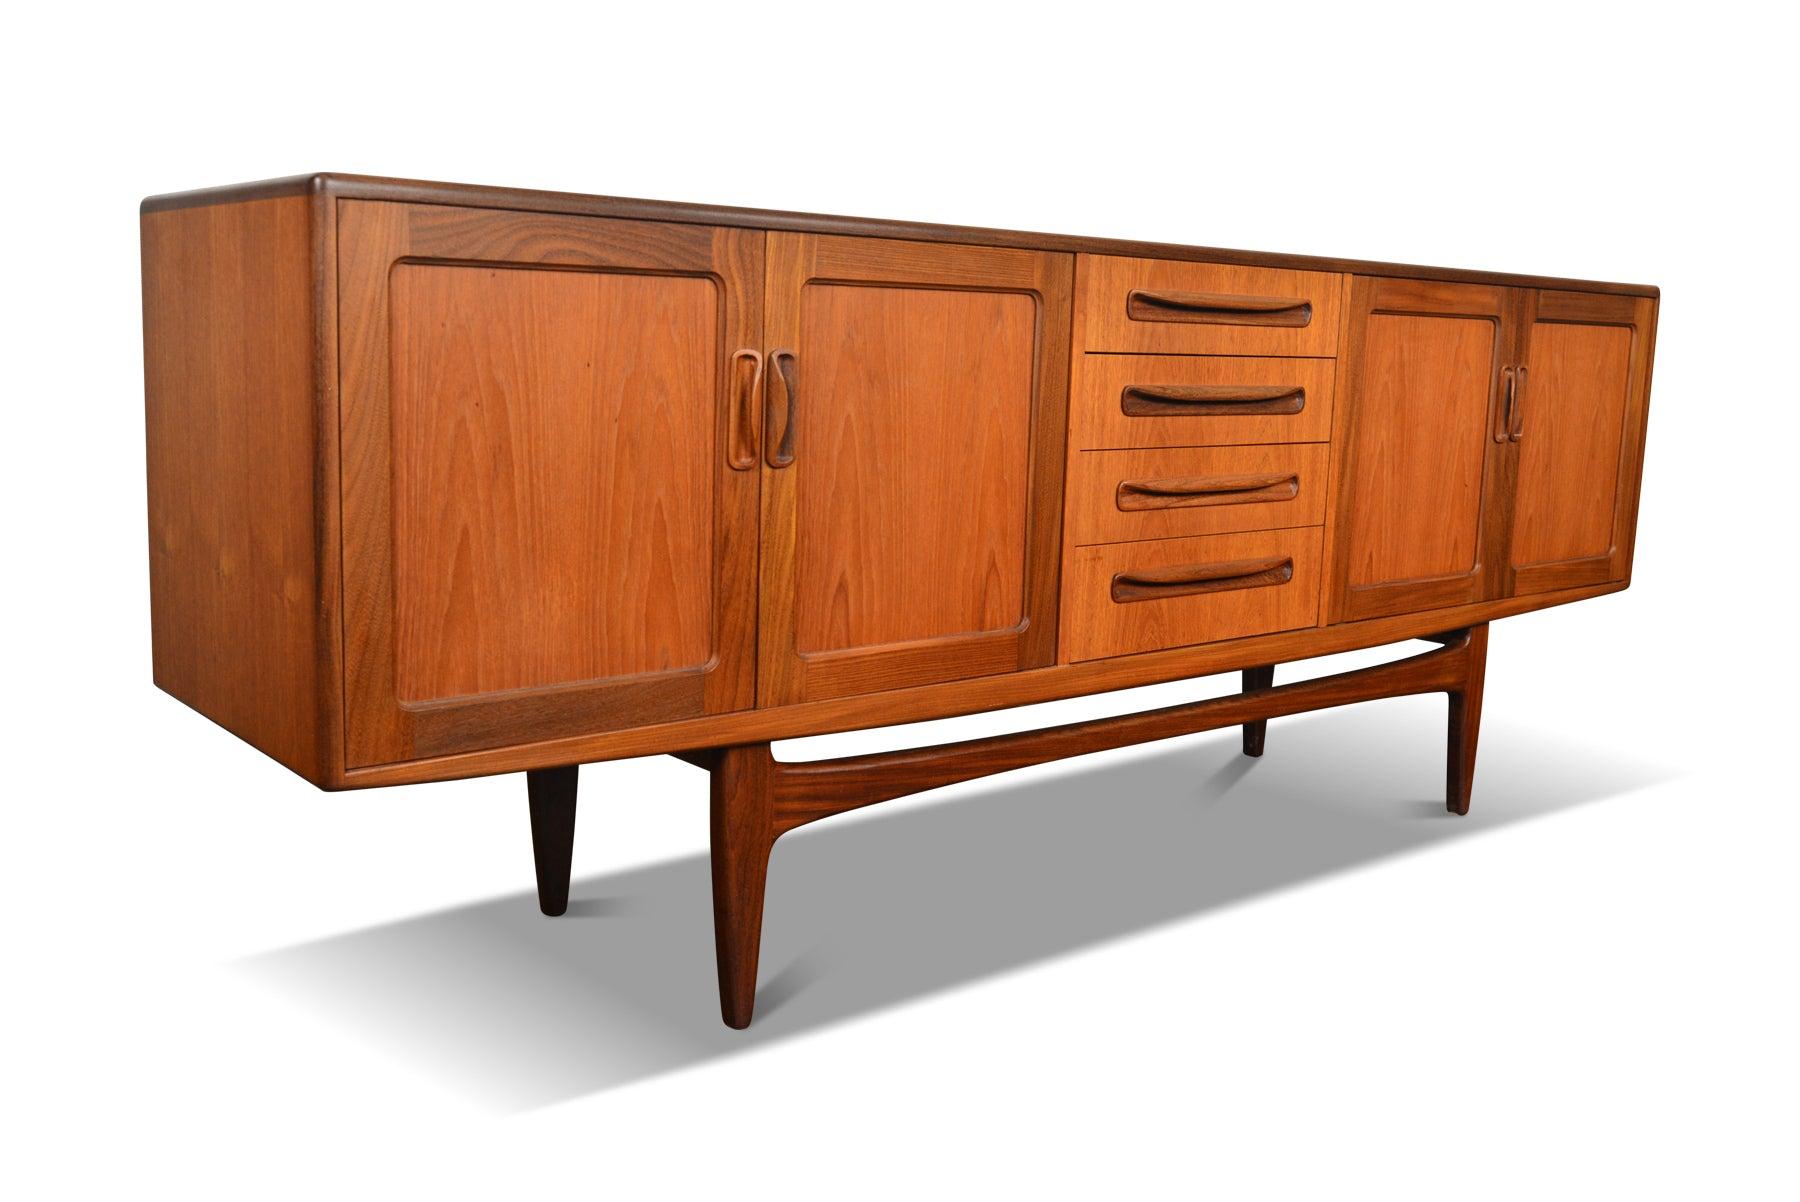 Origin: England
Designer: Victor B. Wilkins
Manufacturer: G Plan
Era: 1960s
Materials: Teak
Measurements: 84? wide x 18? deep x 31.5? tall

Condition: In excellent original condition with typical wear for its vintage. Price includes